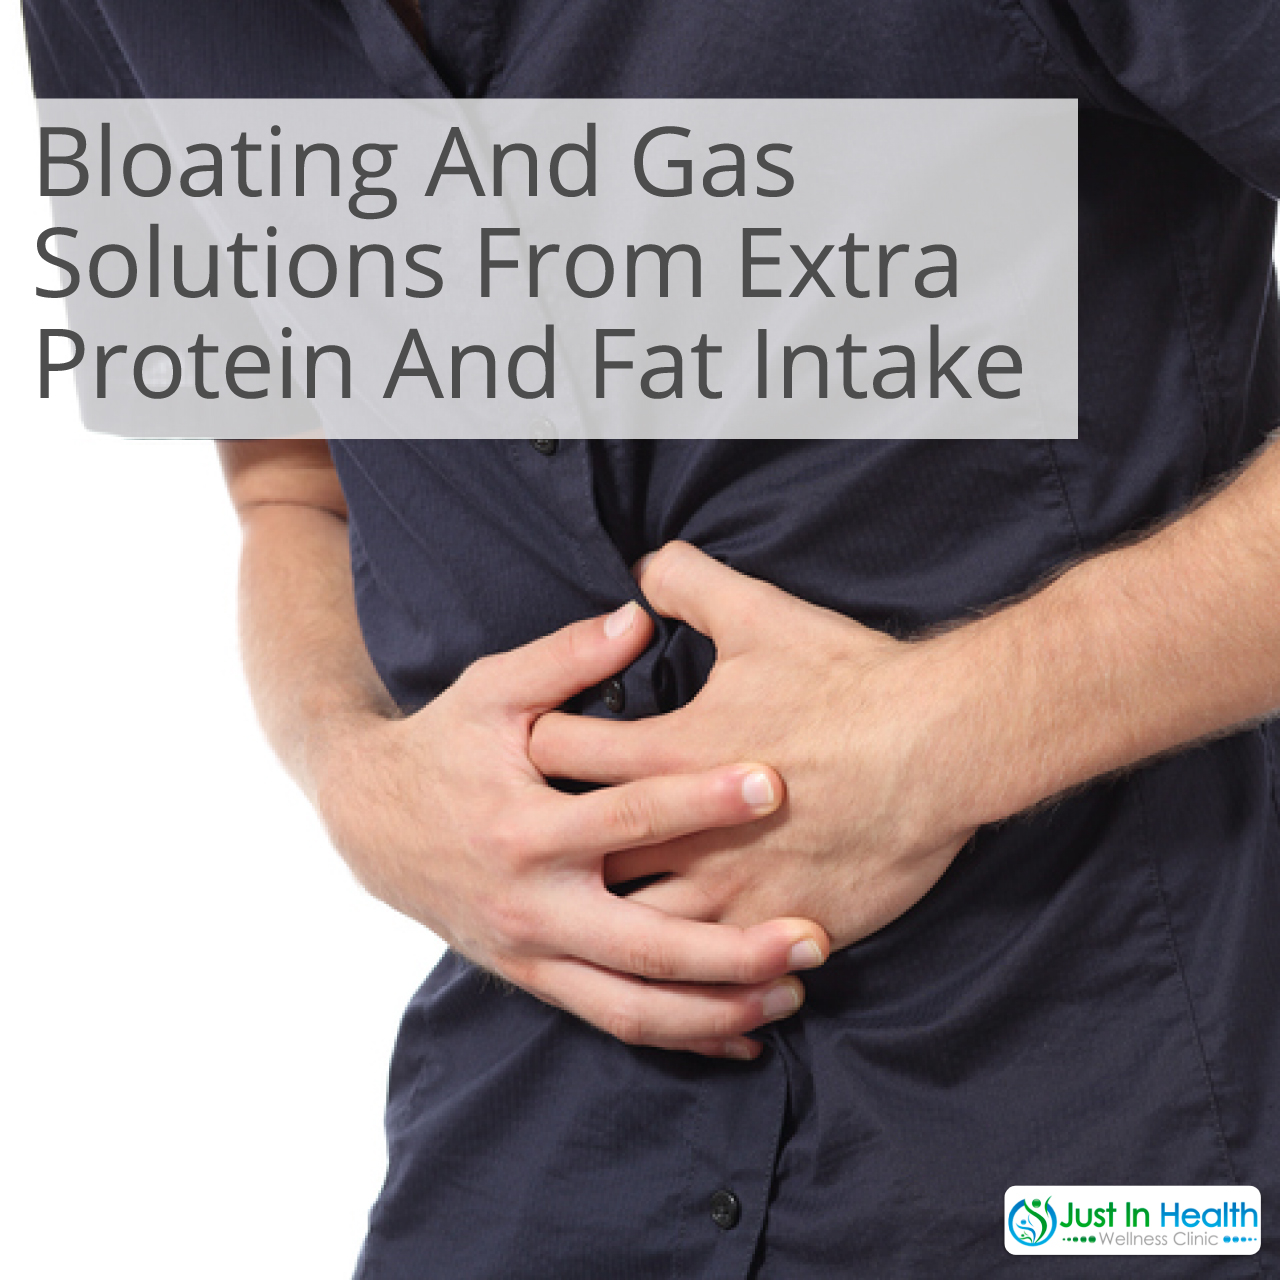 Bloating and gas solutions